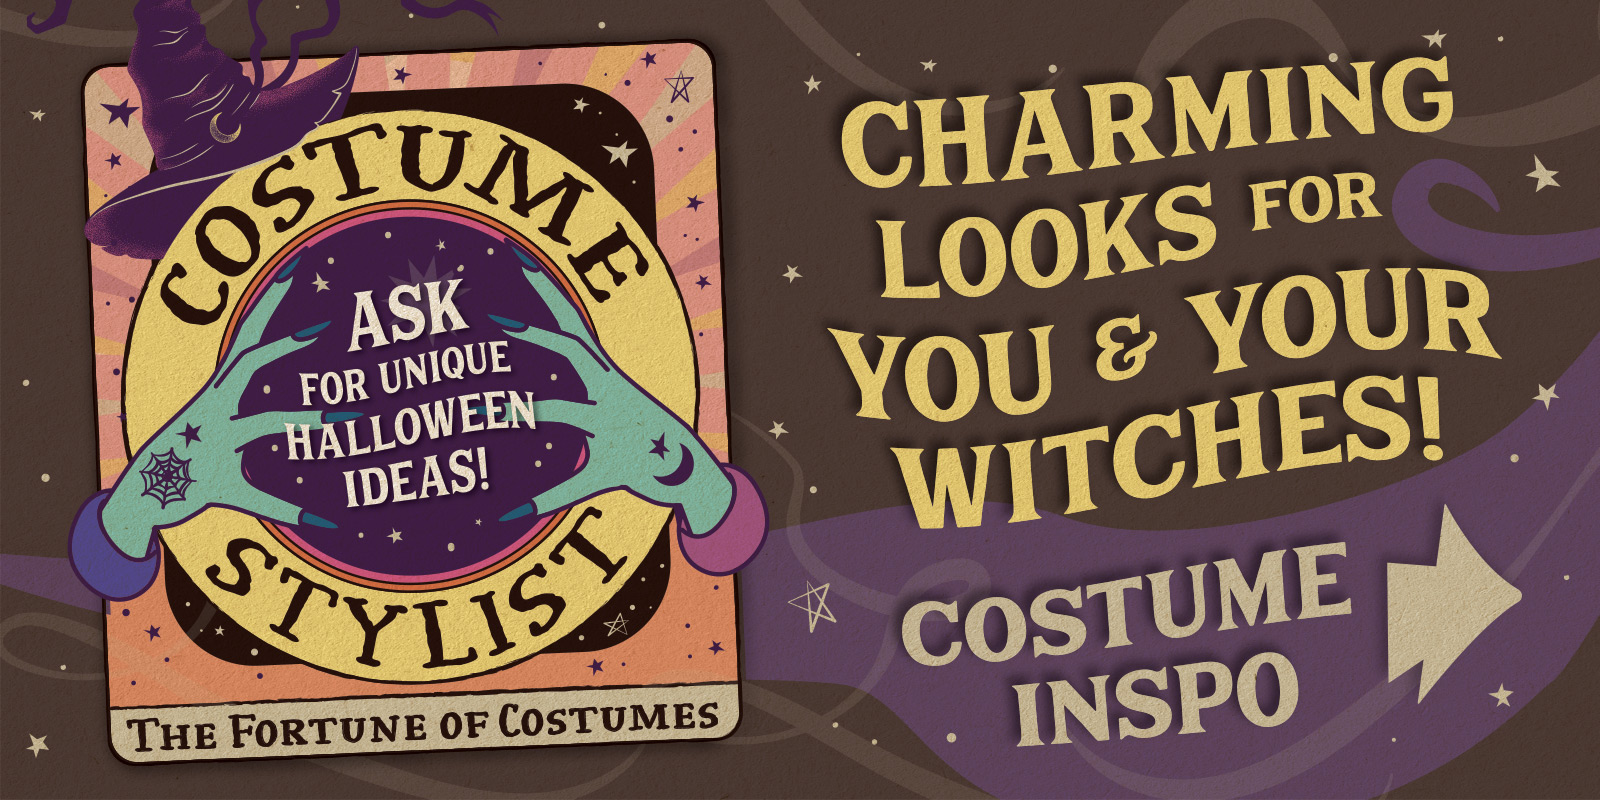 Text reading "Charming Looks for You & Your Witches" over tarot card with witch hands and crystal ball illustration